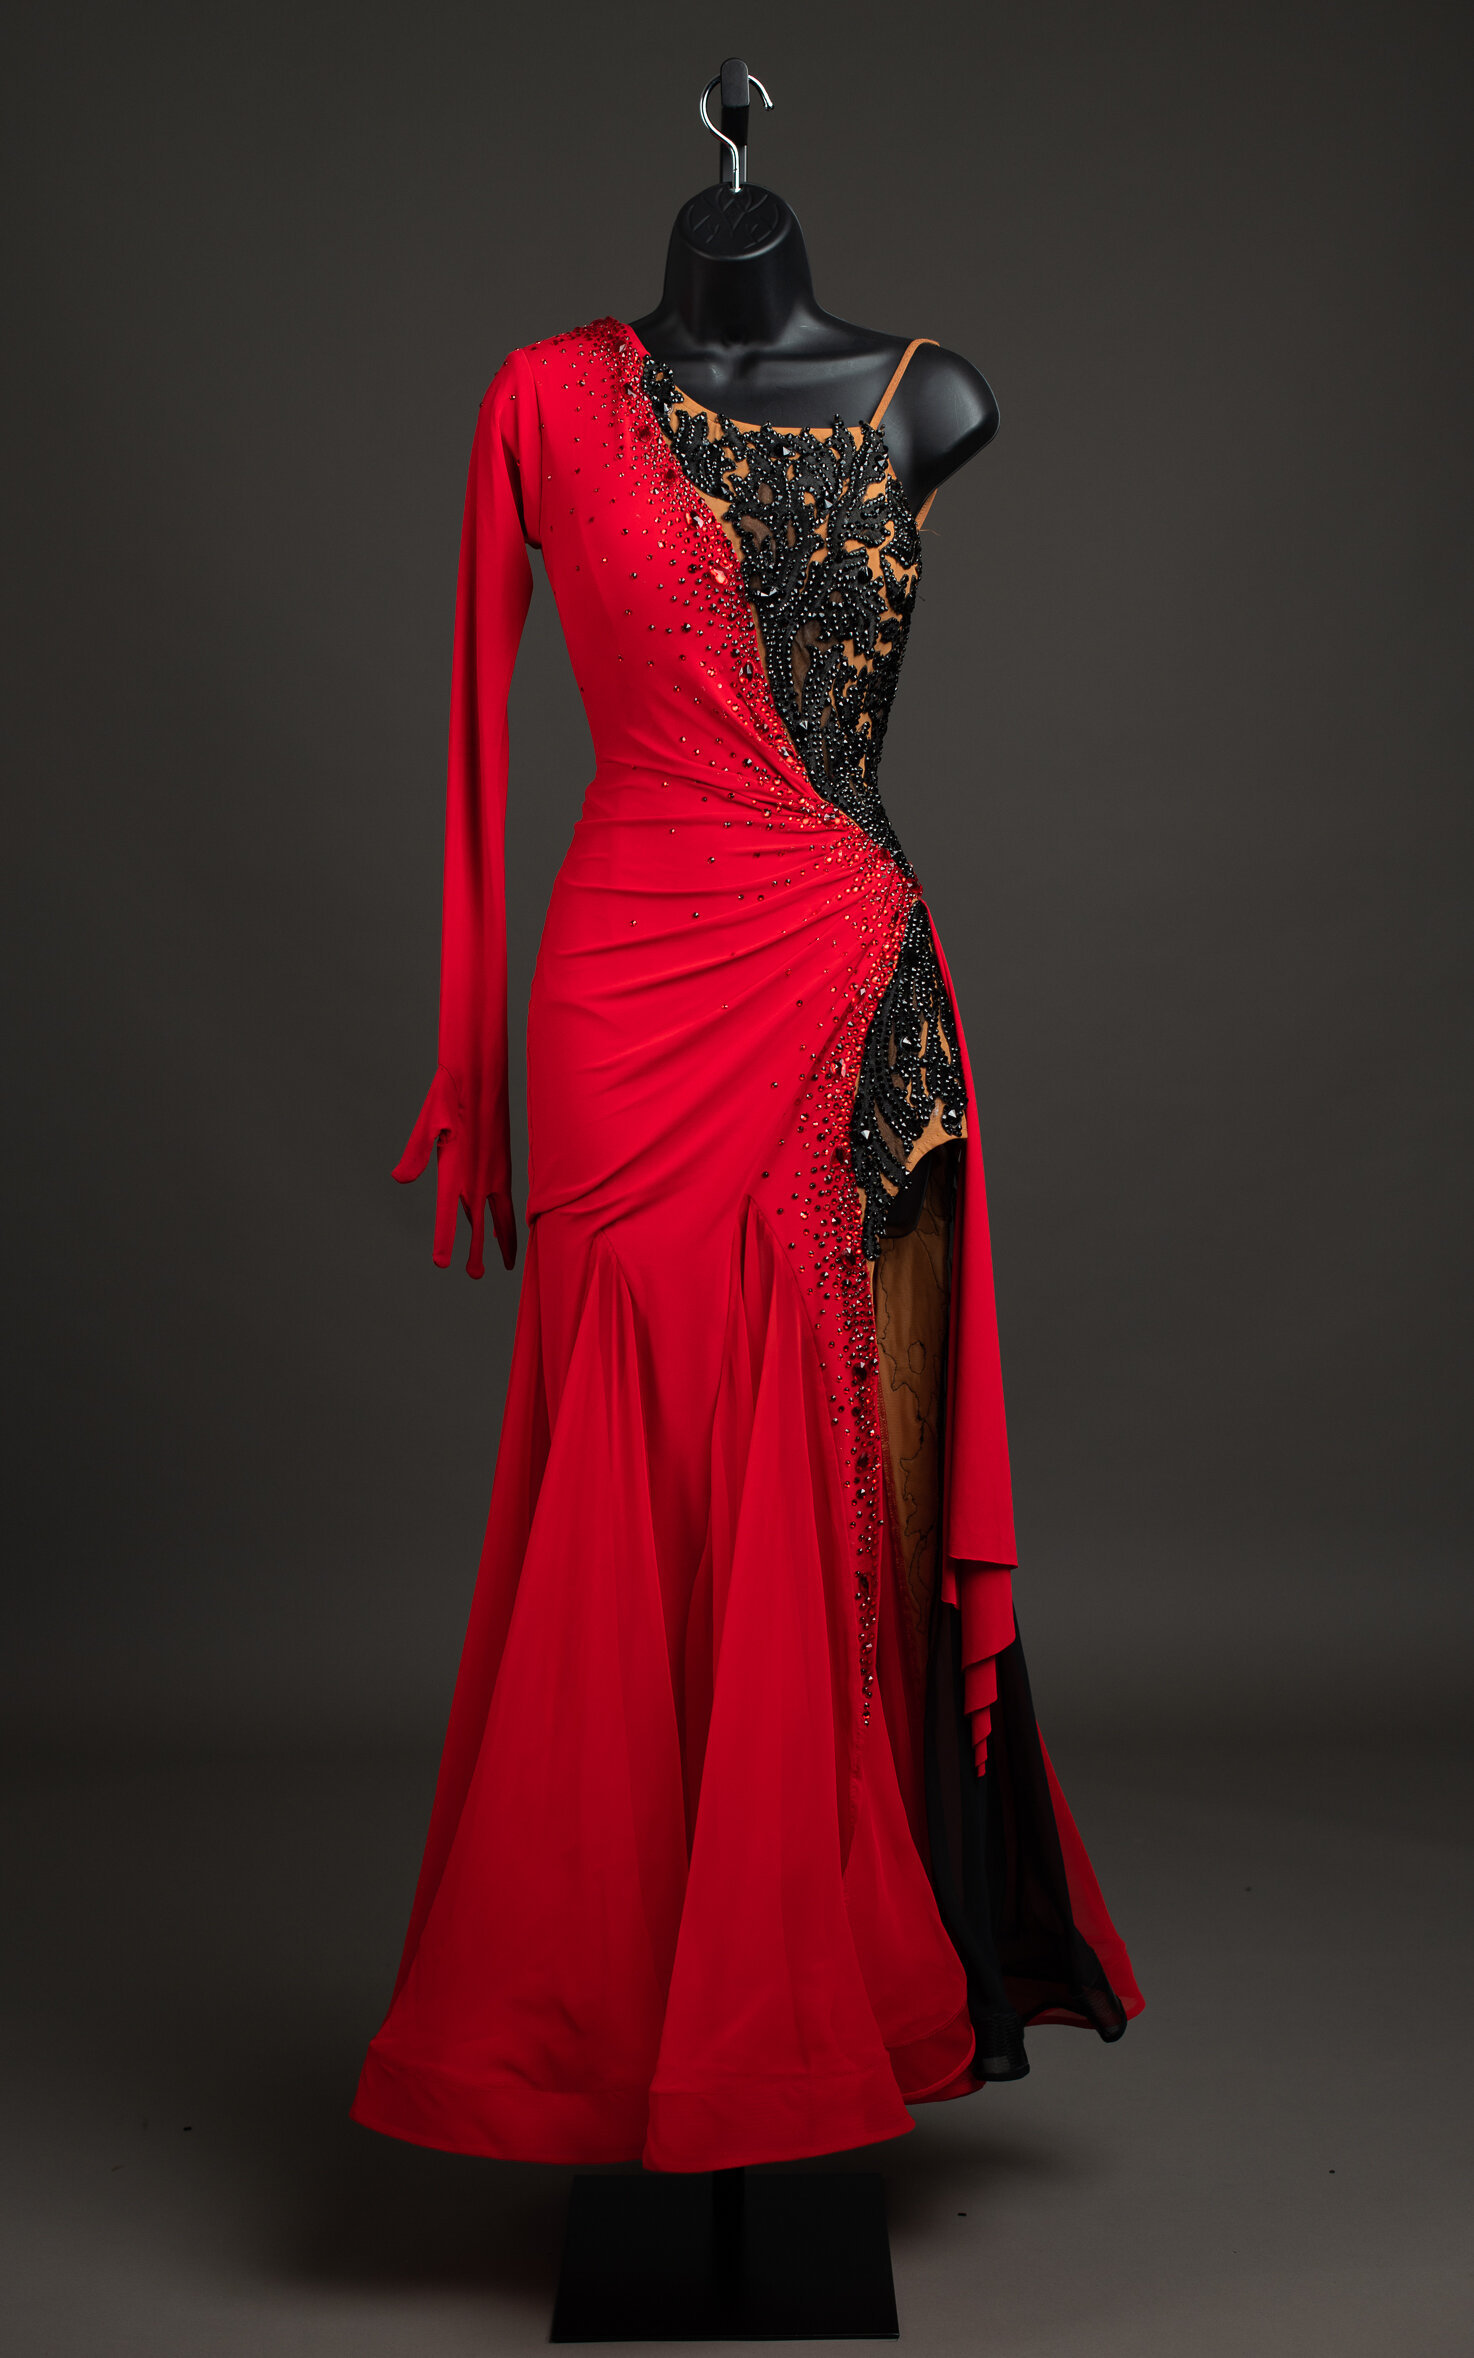 Discover 162+ red and black gown design best